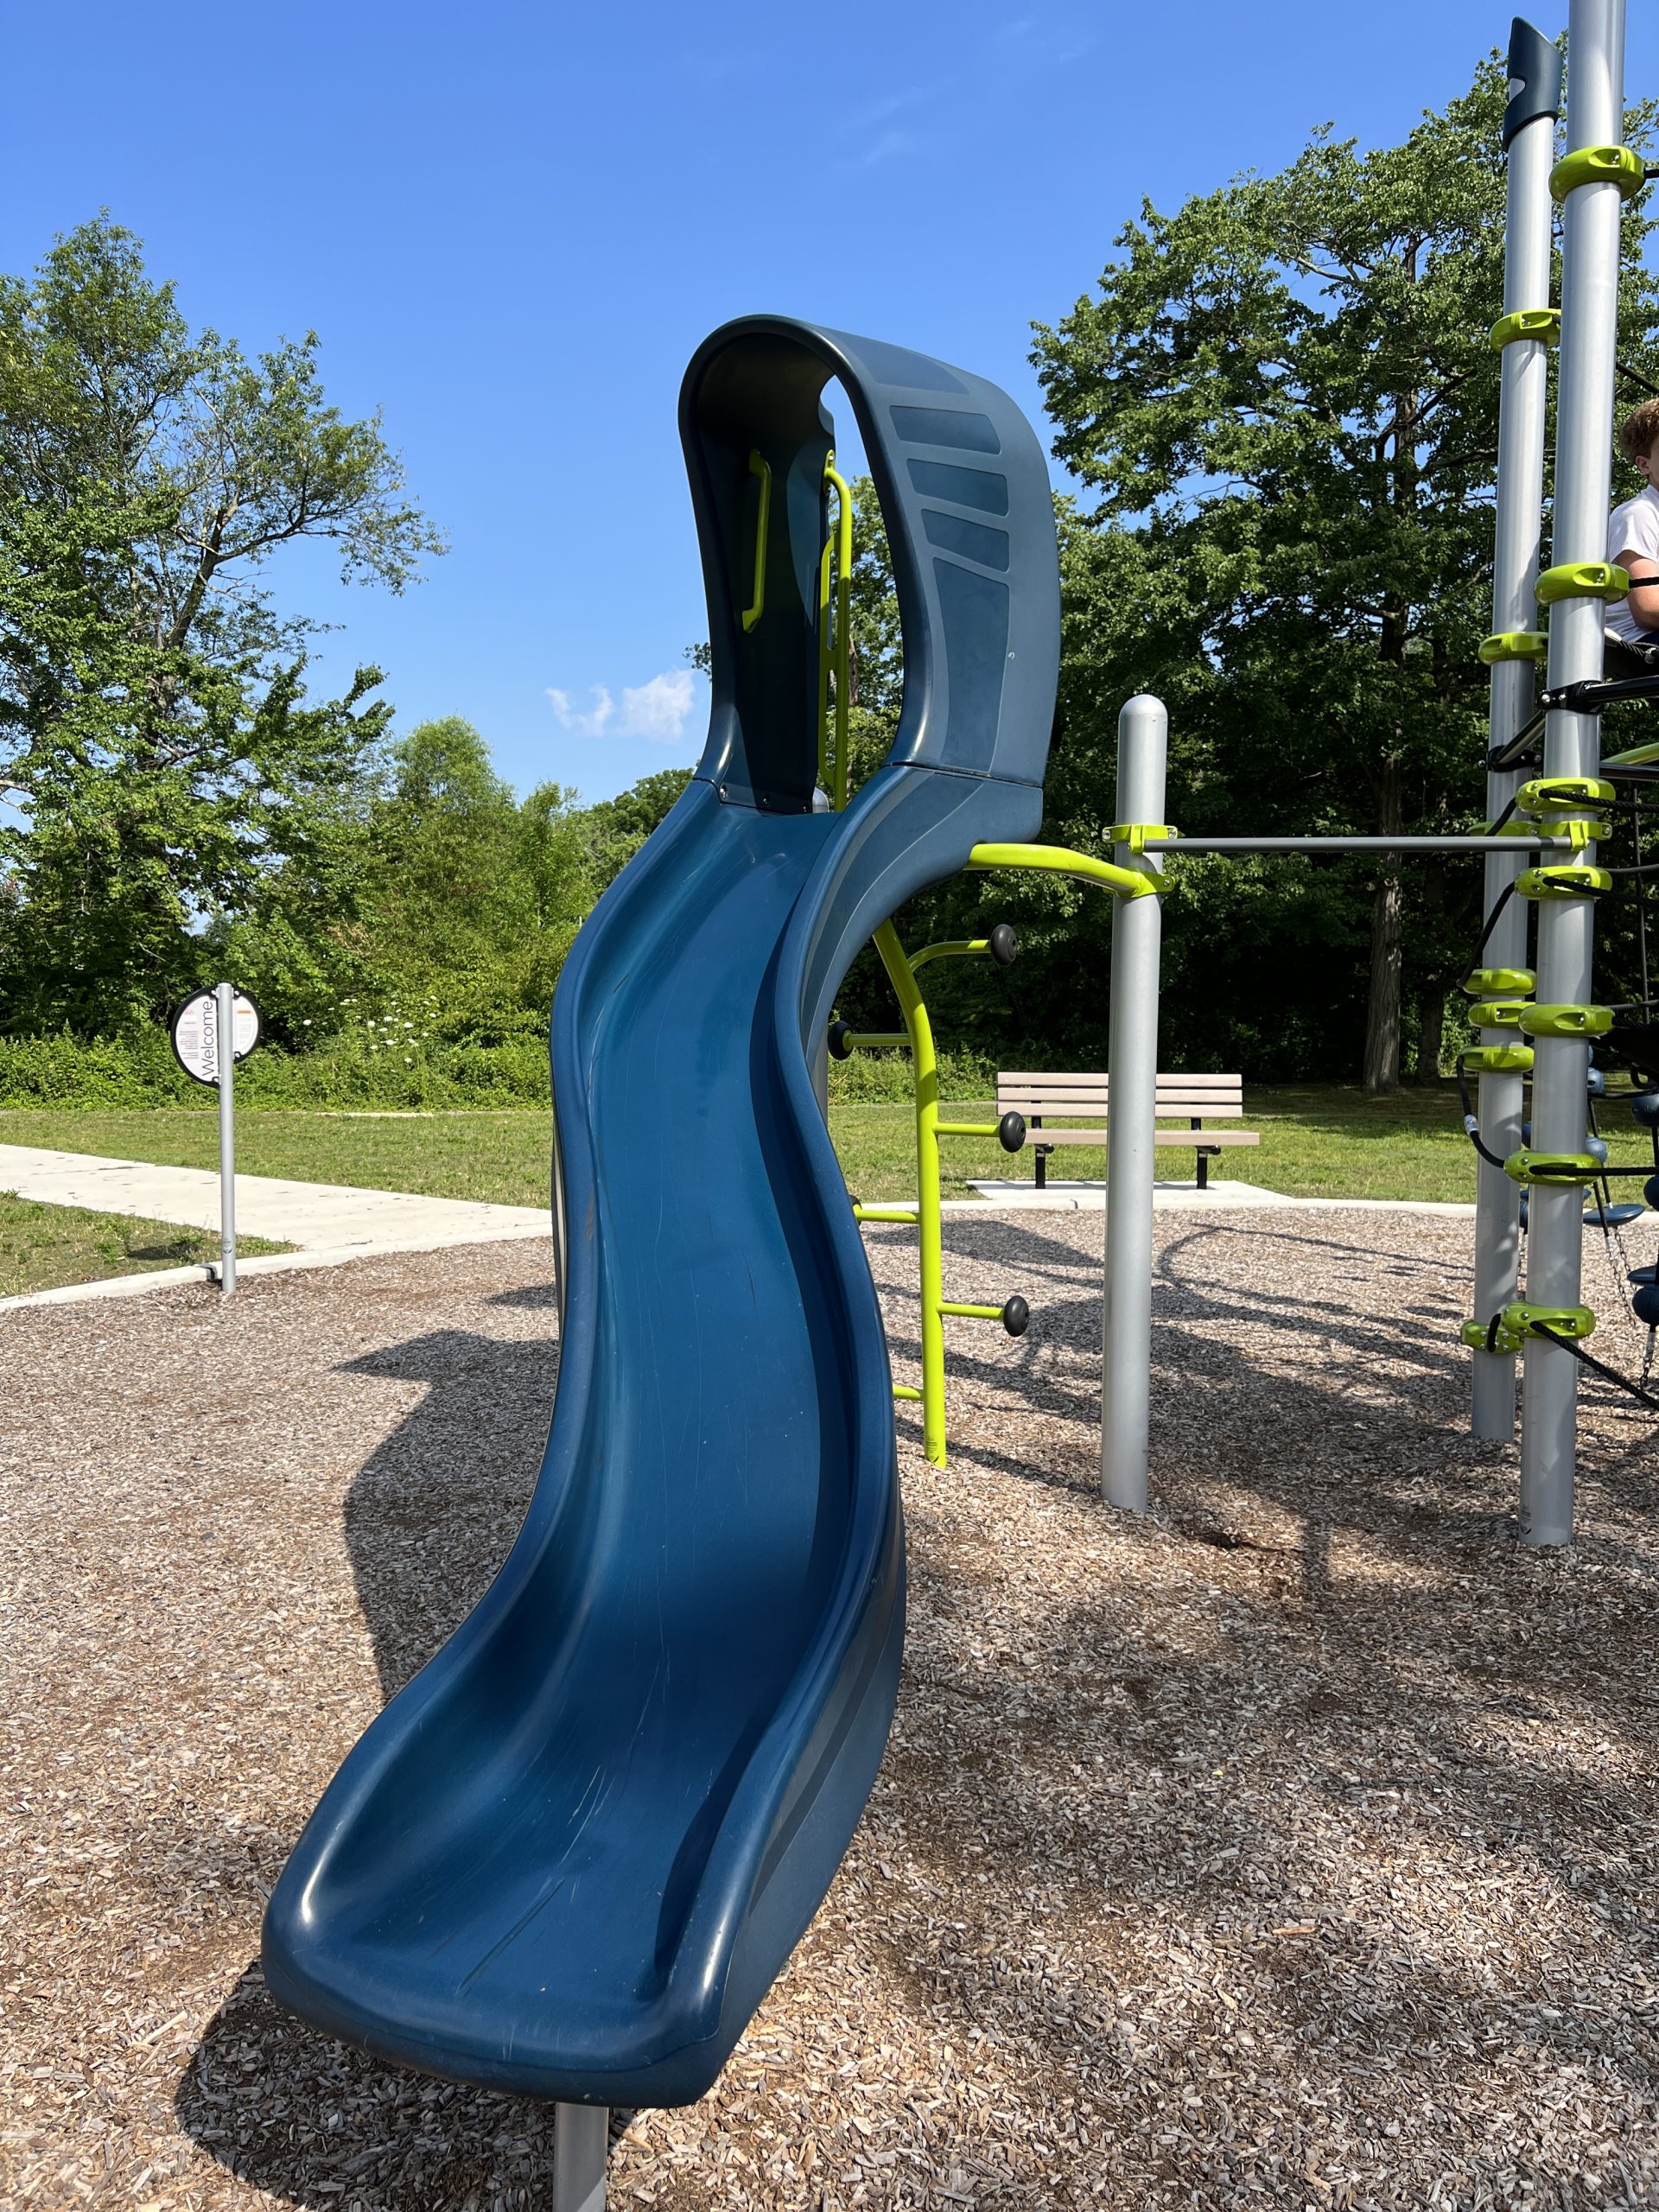 Climbing tower Playground at Berlin Park Playgrounds in Berlin New Jersey curvy slide